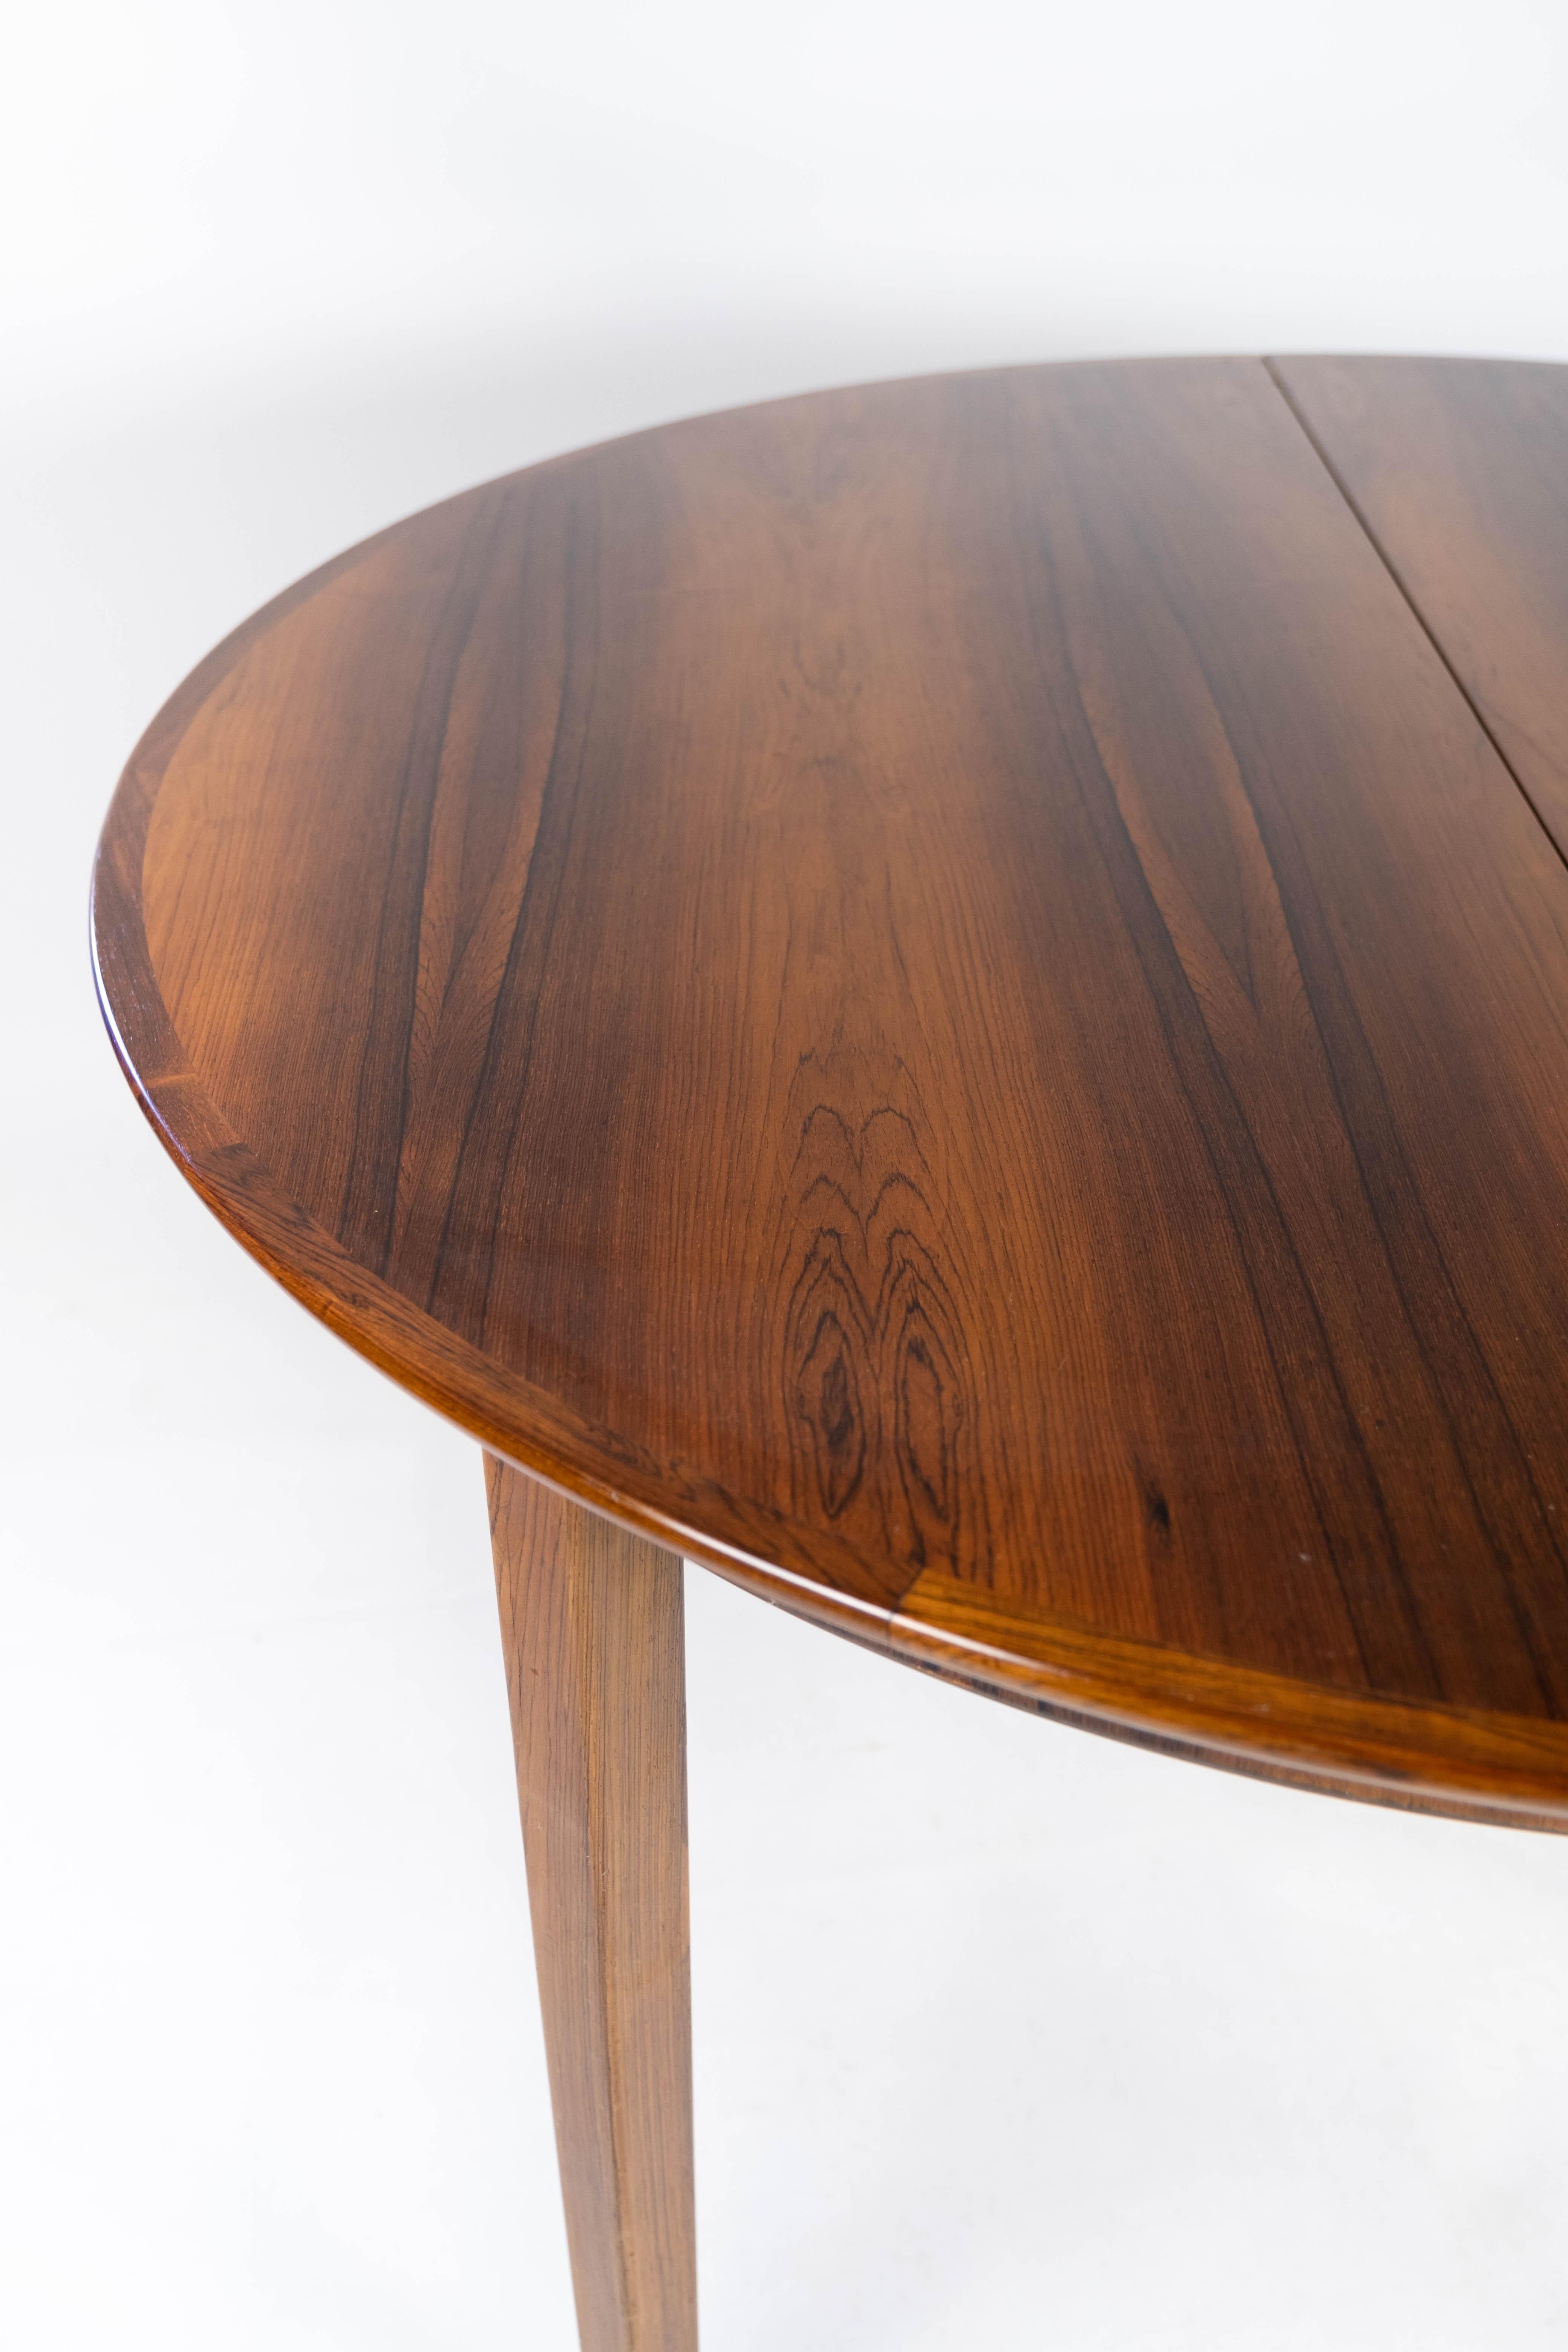 Dining Table Made In Rosewood With Extension Plates, Danish Design From 1960s For Sale 1